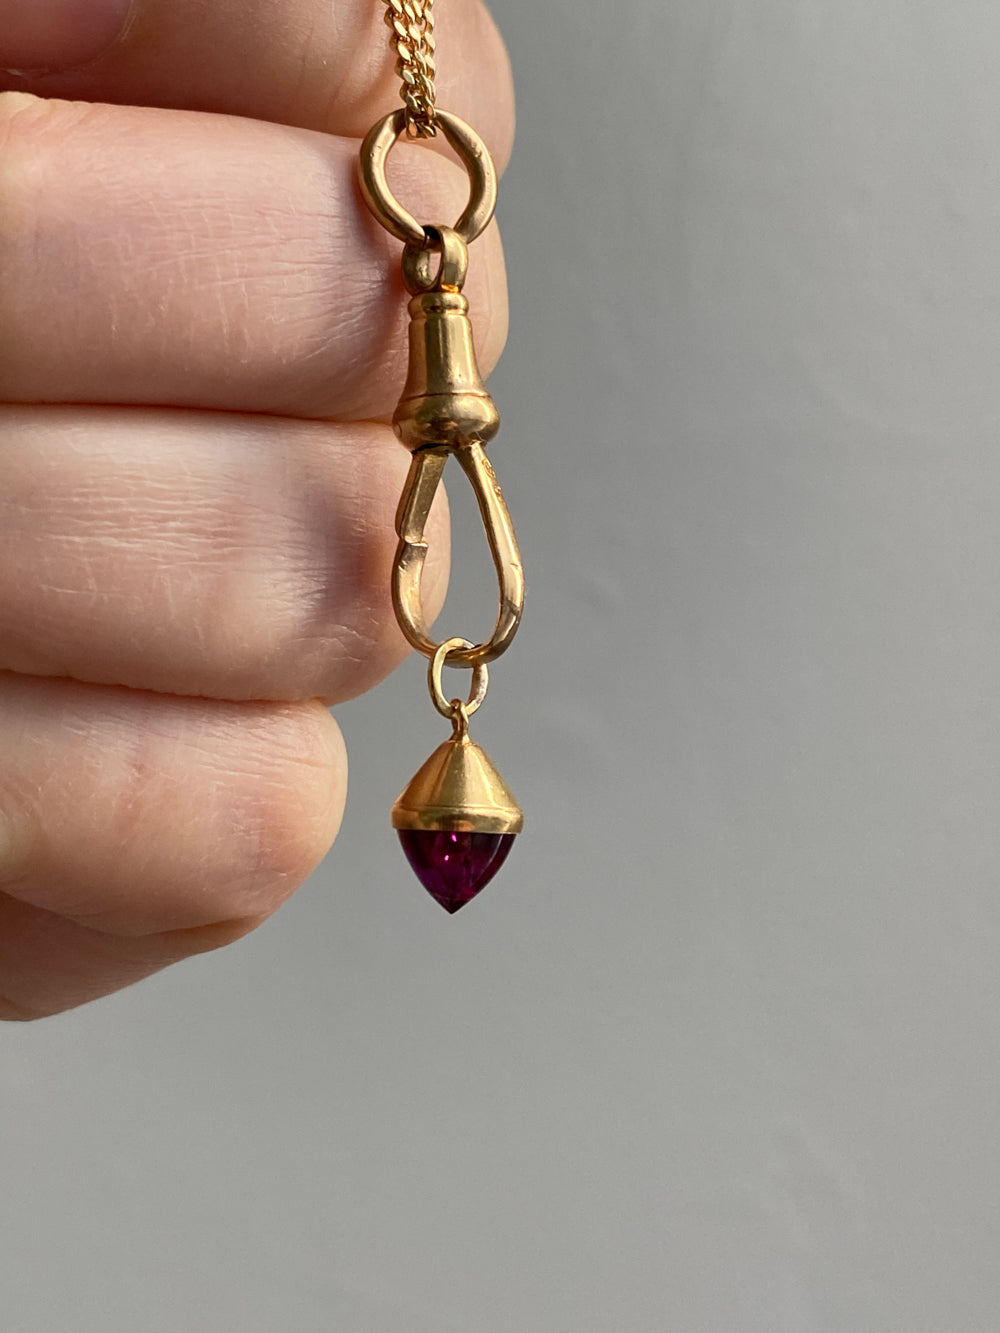 18k gold Swedish vintage charm or pendant - Acorn with Red Stone